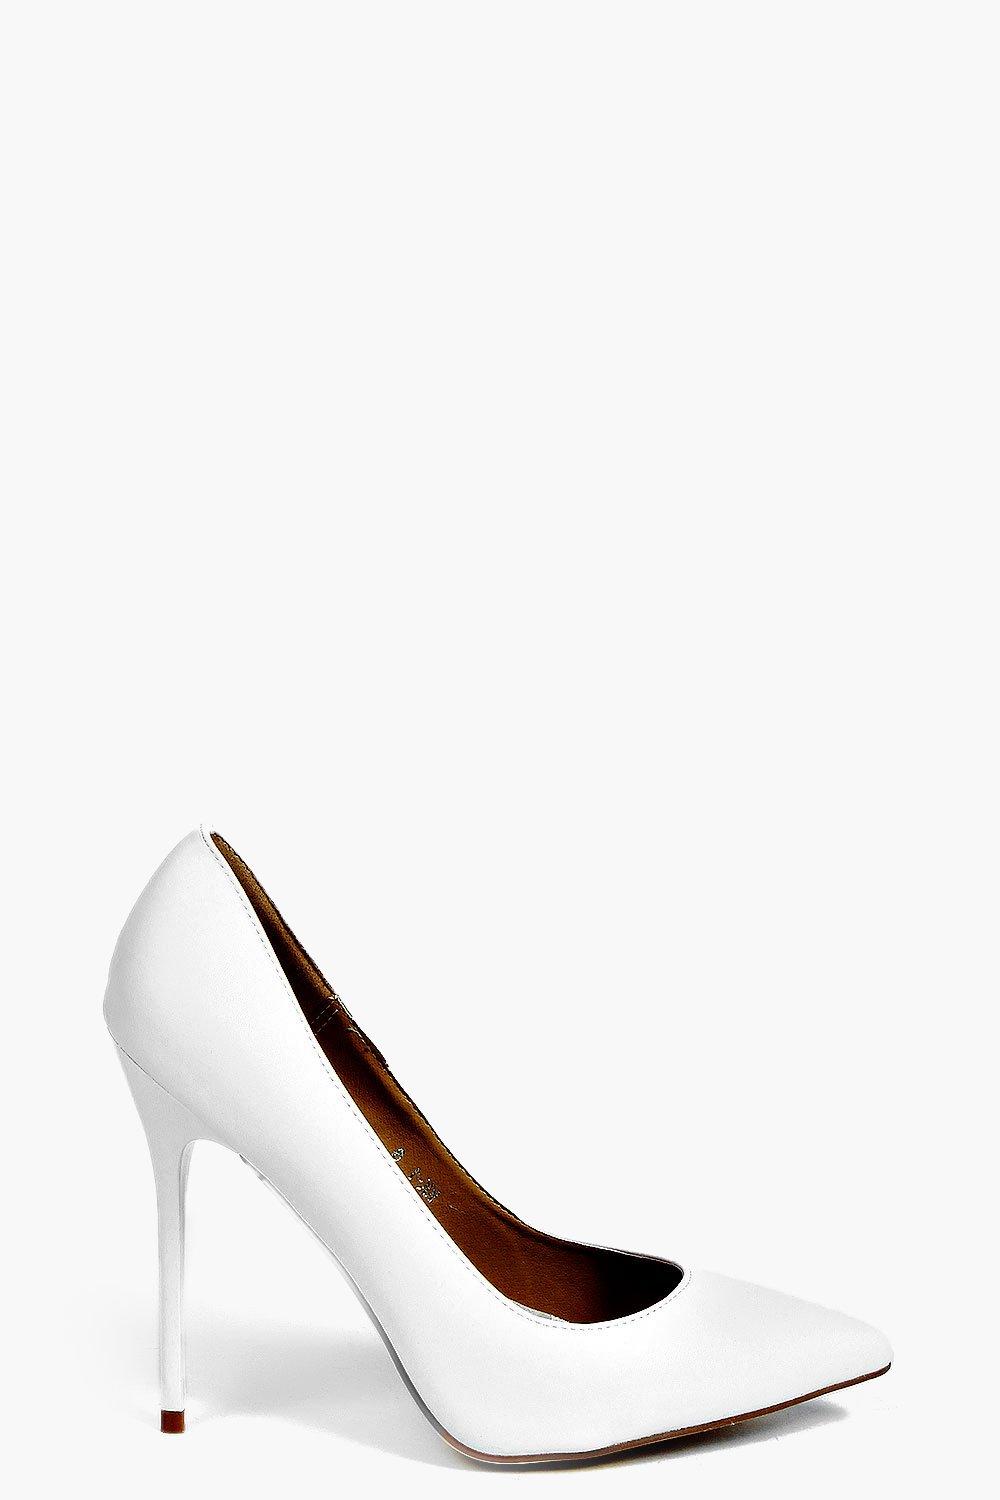 Belle Pointed Toe Court Heels at boohoo.com